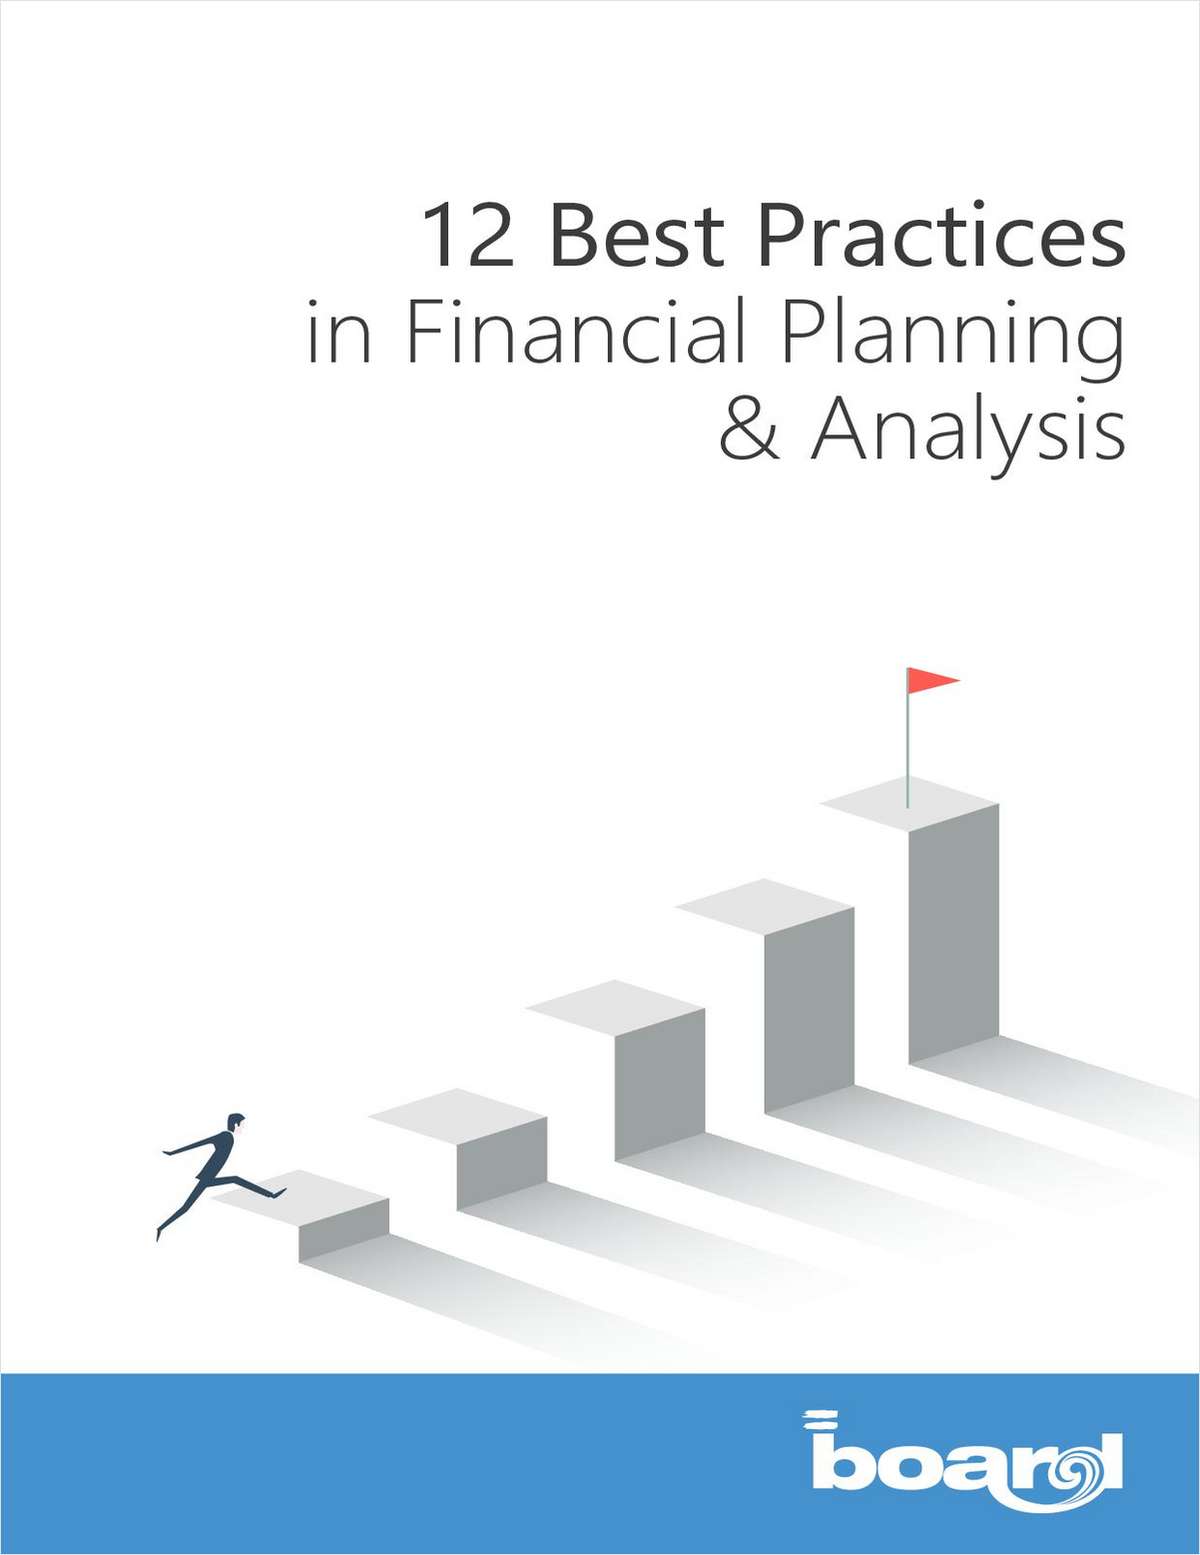 12 Best Practices in Financial Planning & Analysis